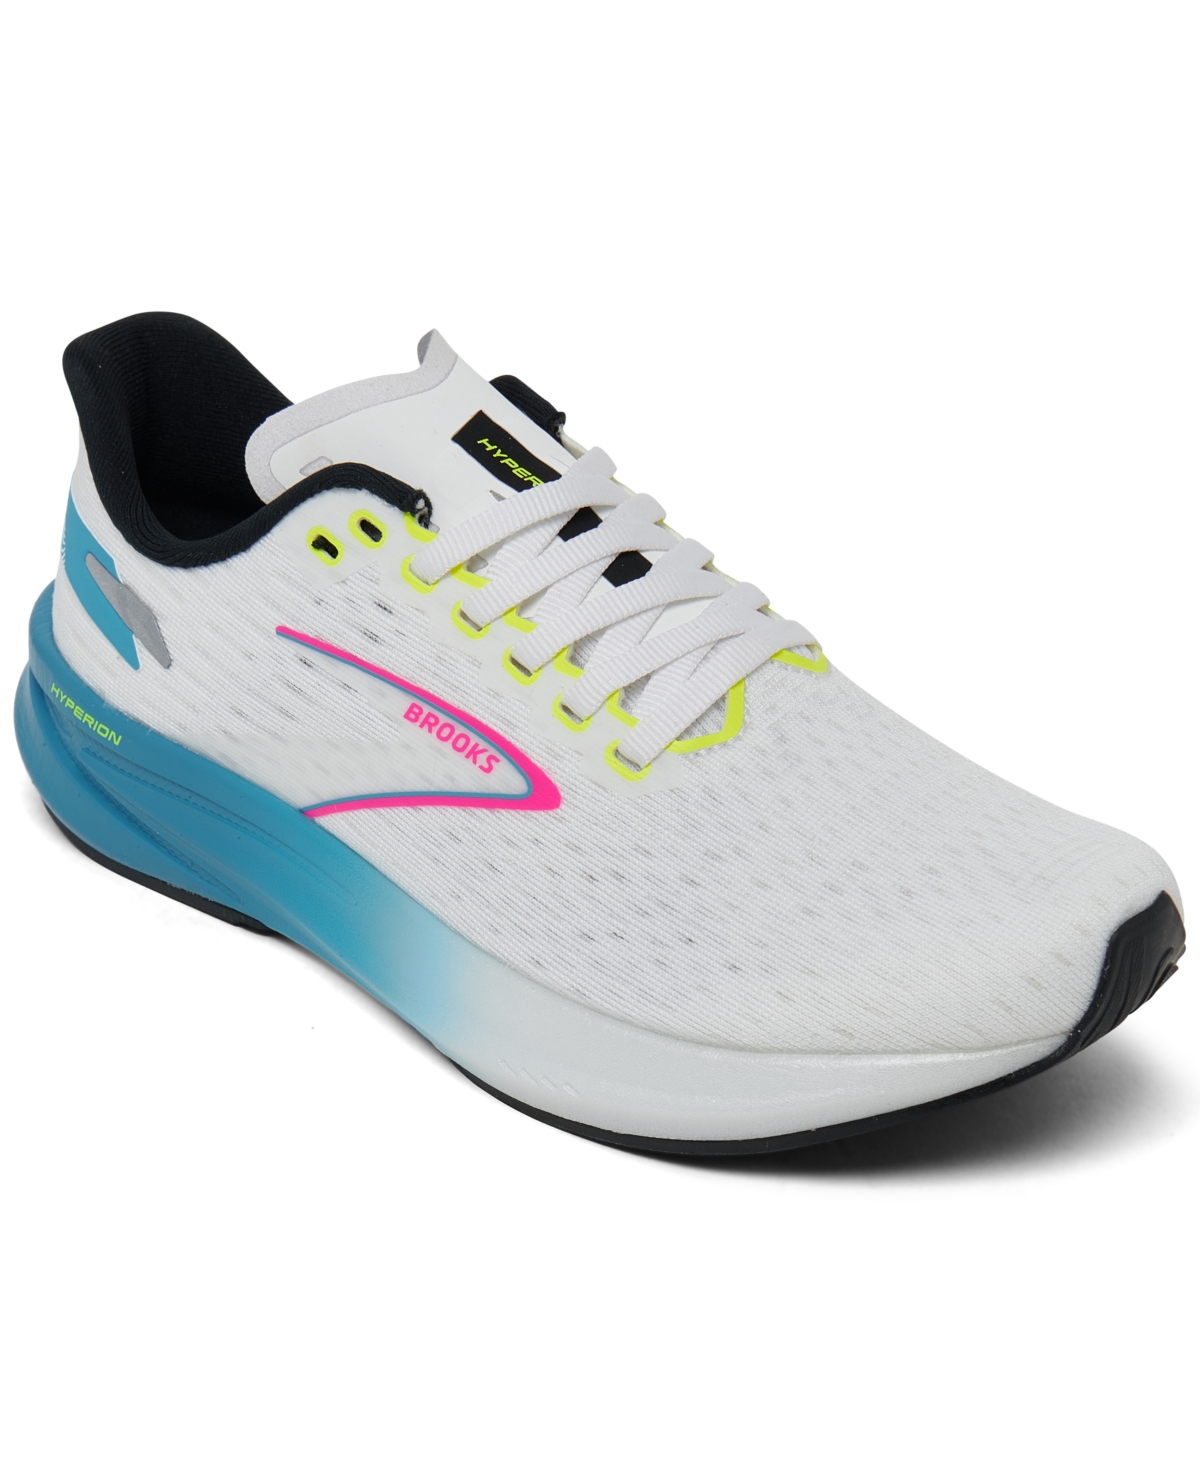 Women's Hyperion Running Sneakers from Finish Line - White, Blue, Pink